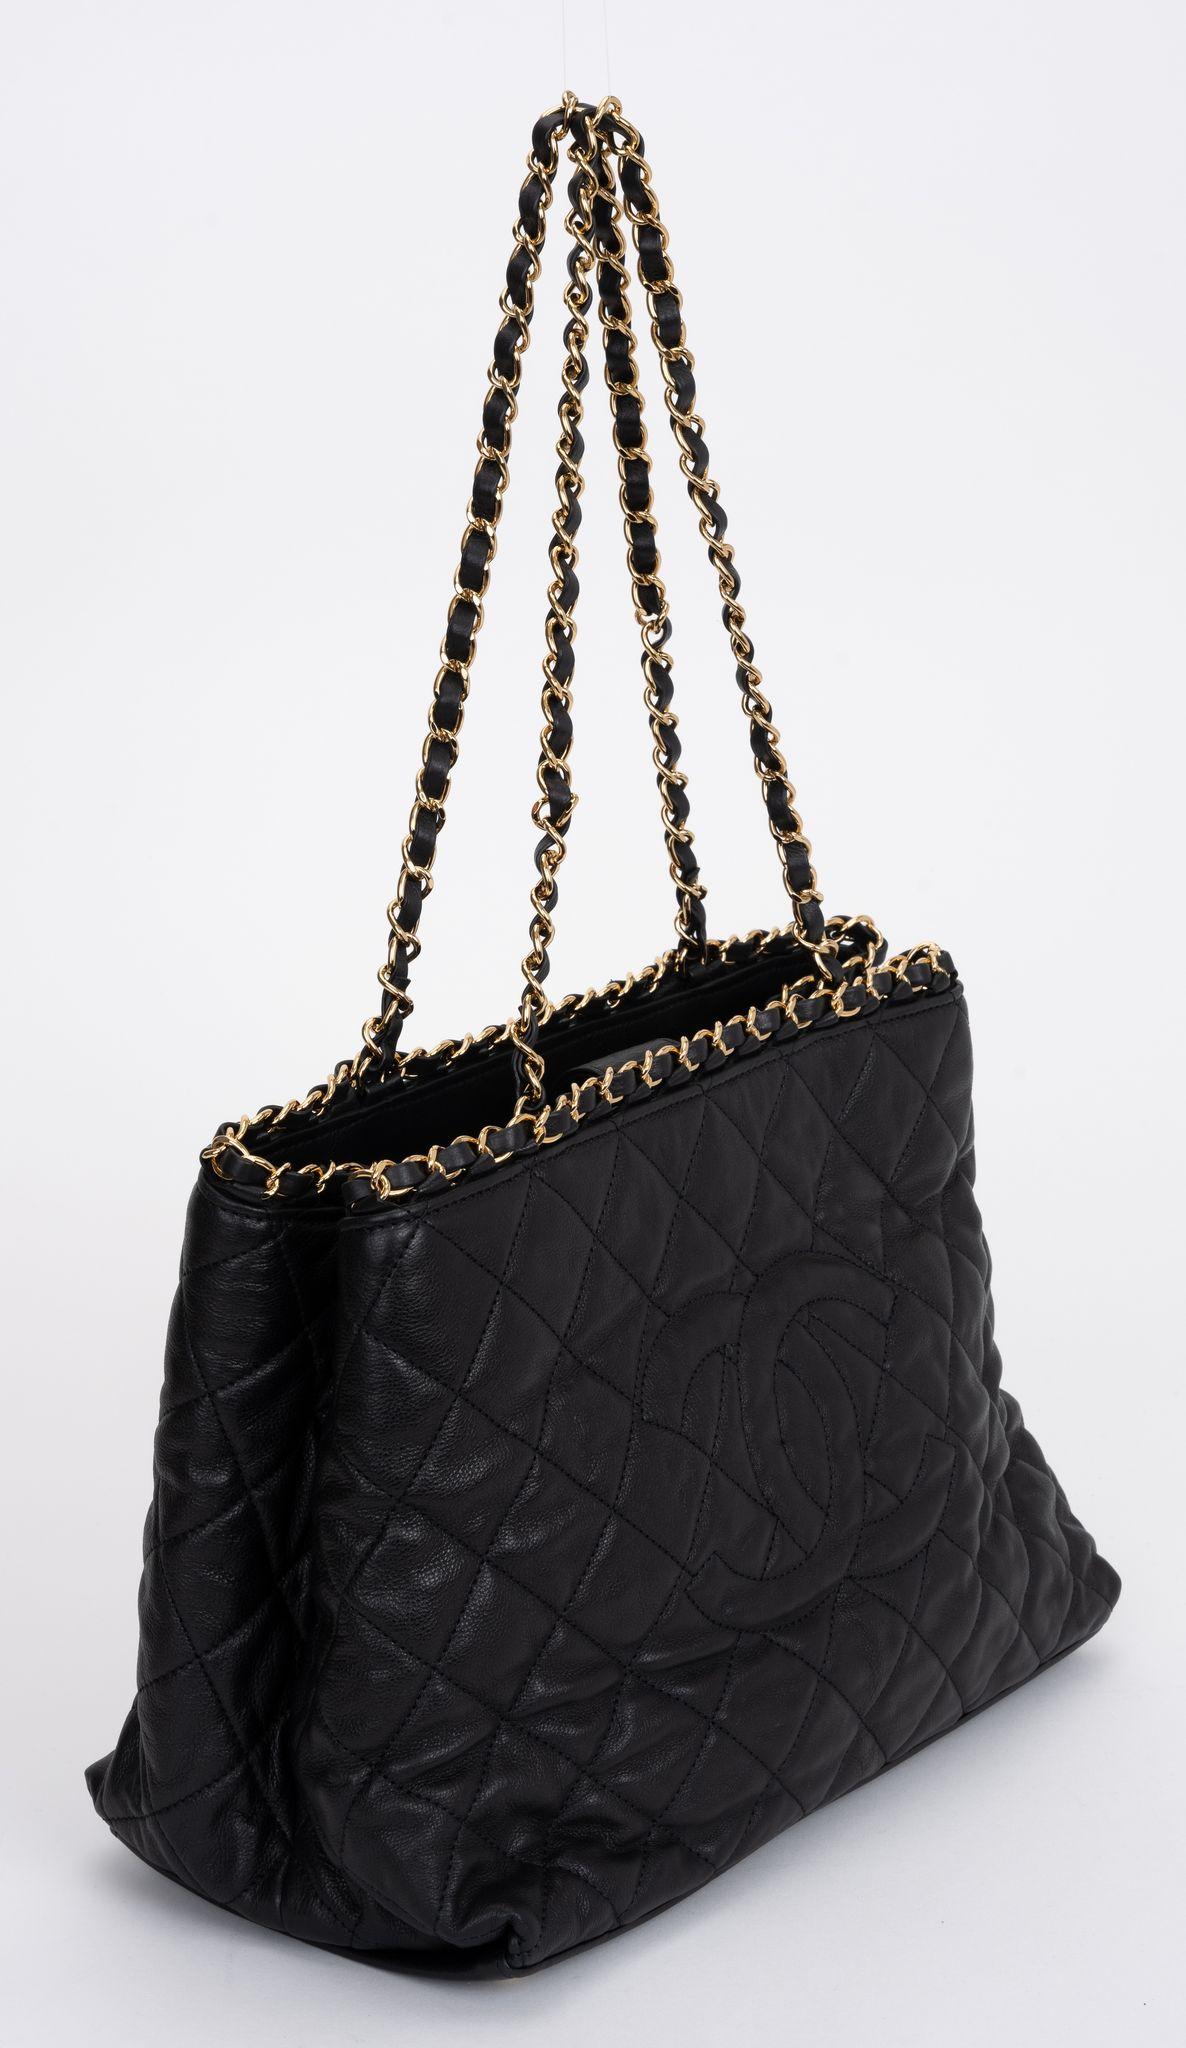 Chanel Calfskin Quilted Small Chain Me Tote in black with an intertwined leather gold shoulder strap. The bag features Chanel CC logo. Interior has one zipper pocket and patch pockets. Shoulder drop 10